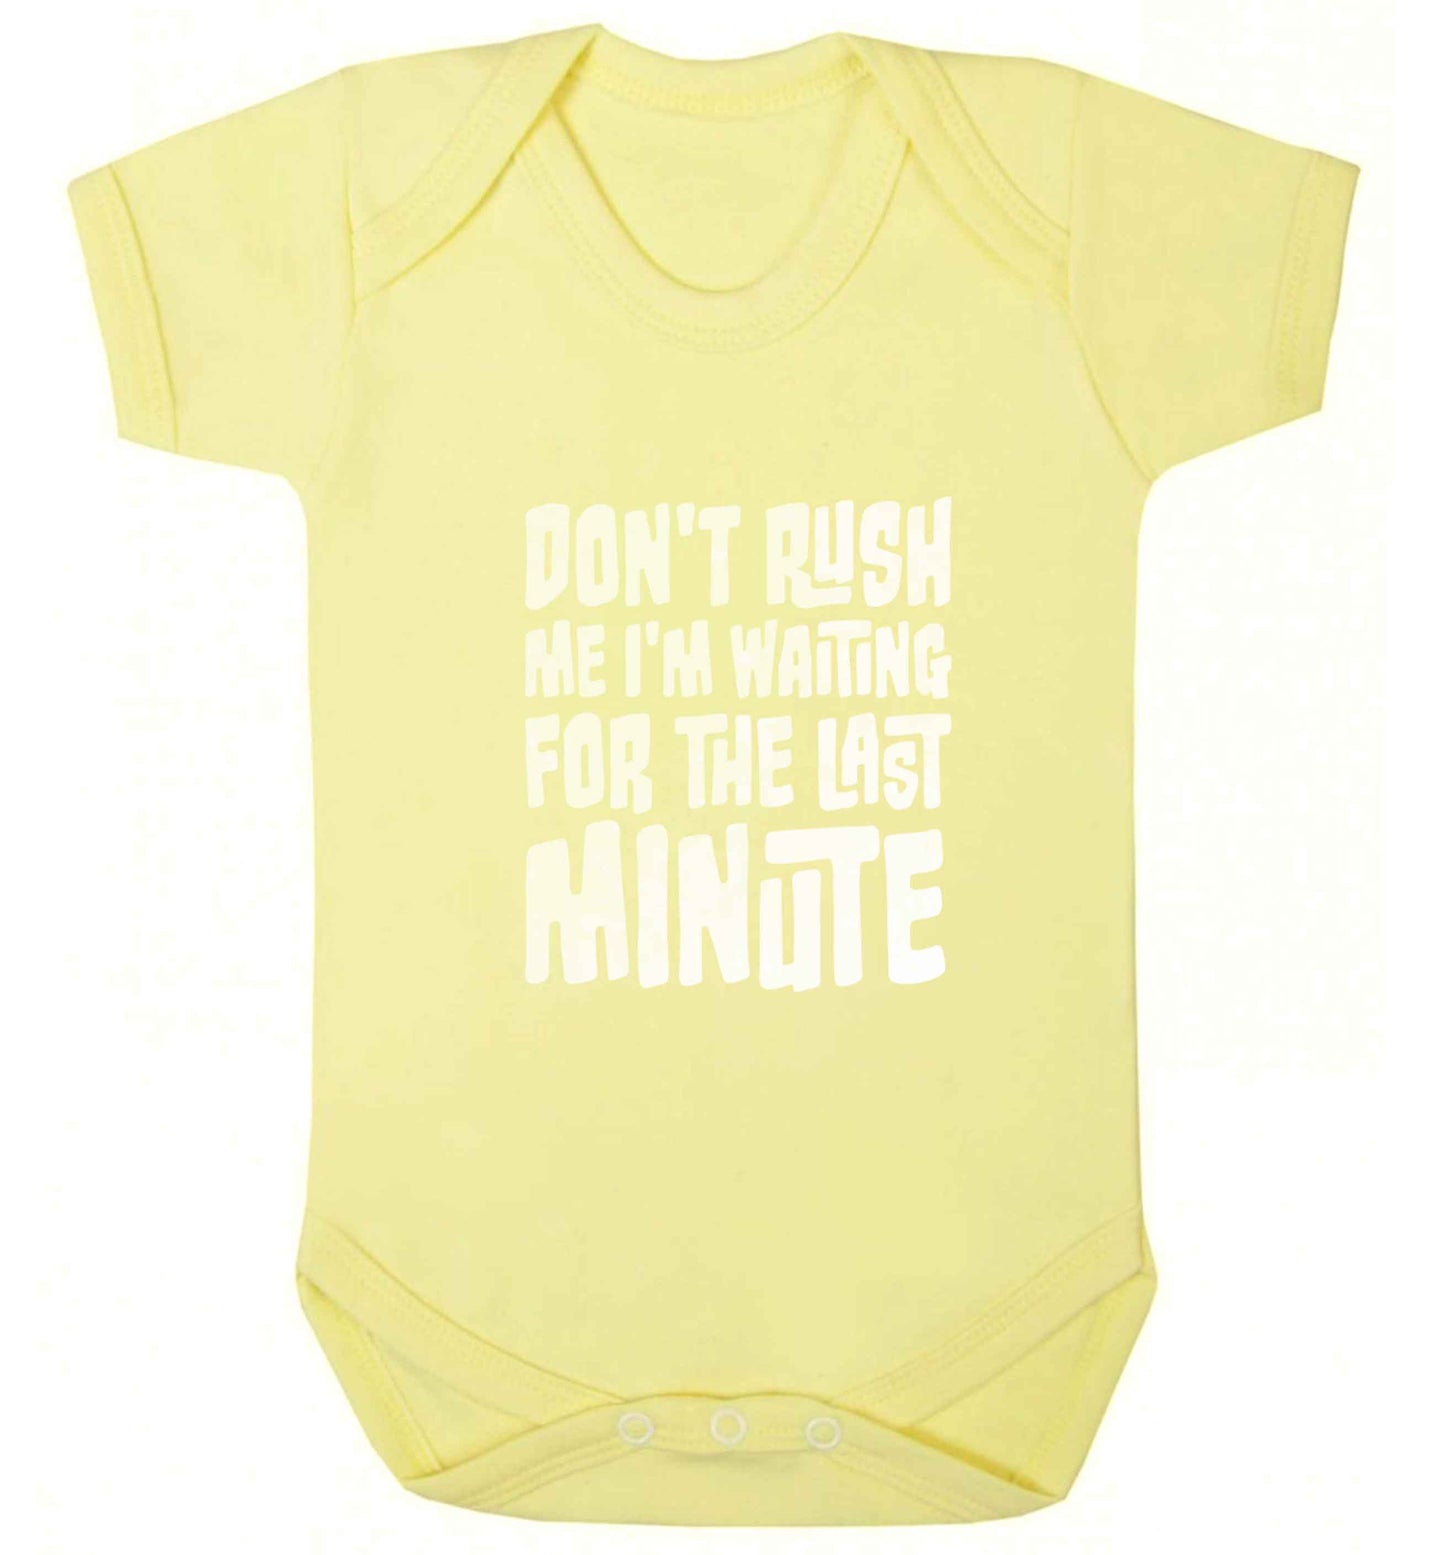 Don't rush me I'm waiting for the last minute baby vest pale yellow 18-24 months